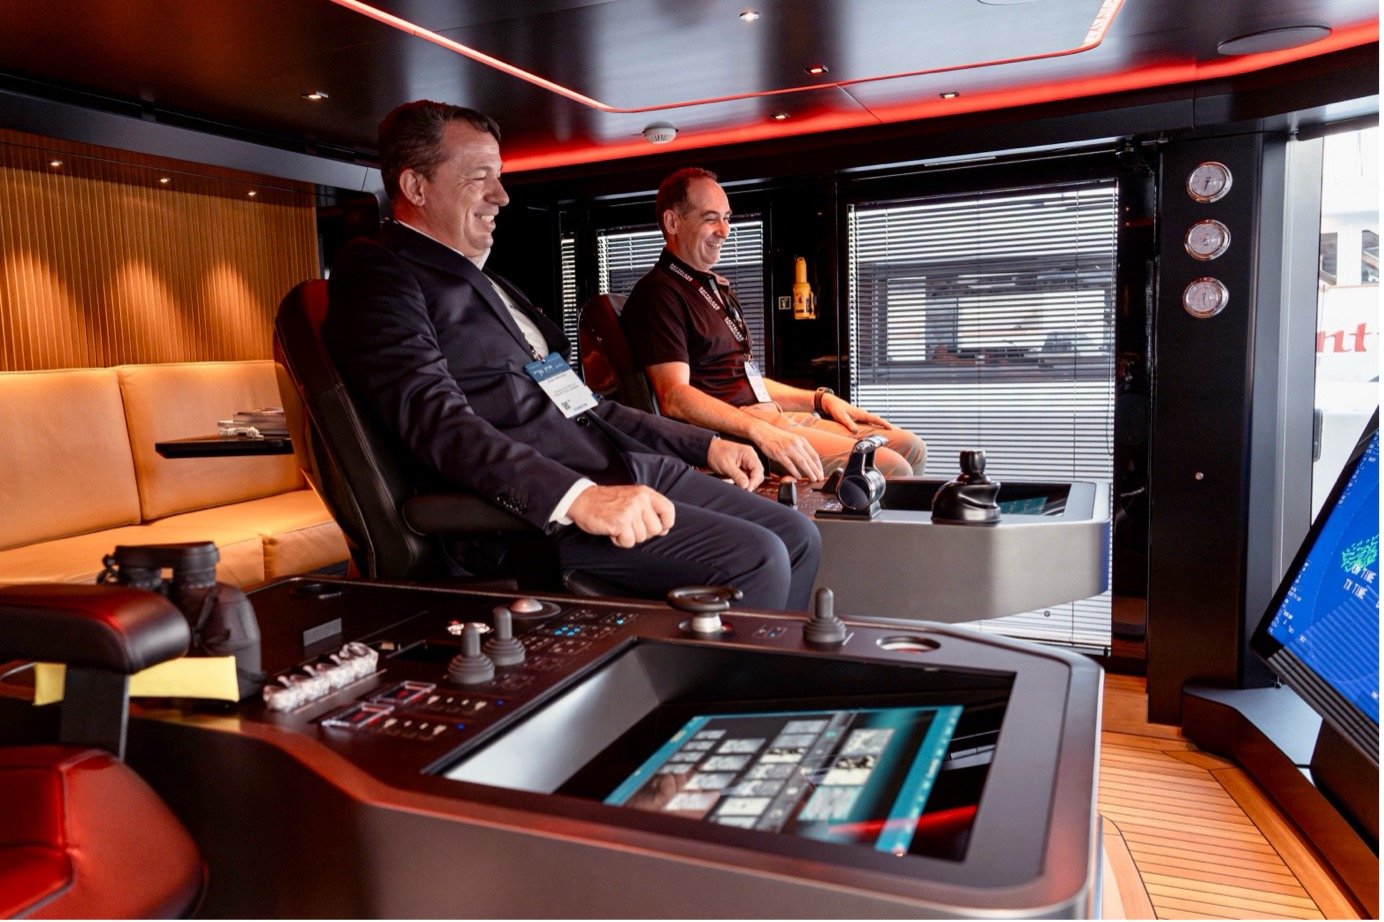 The image shows Massimo Bugli from FURUNO Italia, and Mehdi Bounoua from Hatteland Technology, in the wheelhouse of a yacht at the Monaco Yacht Show 2023. They are seated in the officers' chairs, smiling, exploring the bridge system.